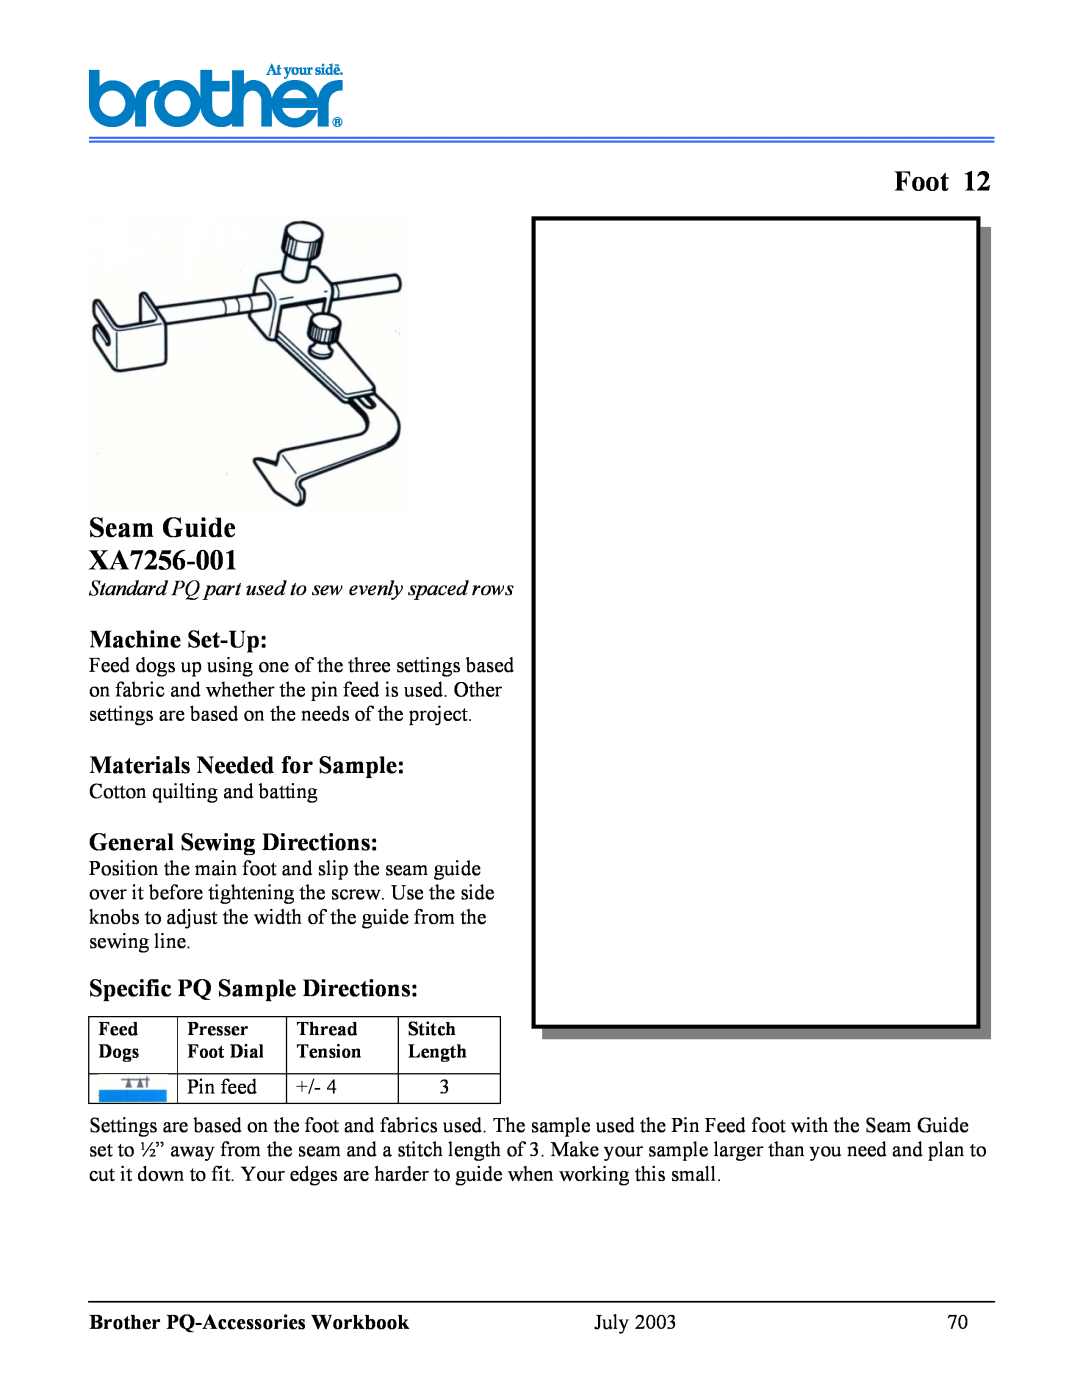 Brother 1300 Foot Seam Guide XA7256-001, Machine Set-Up, Materials Needed for Sample, General Sewing Directions, Pin feed 